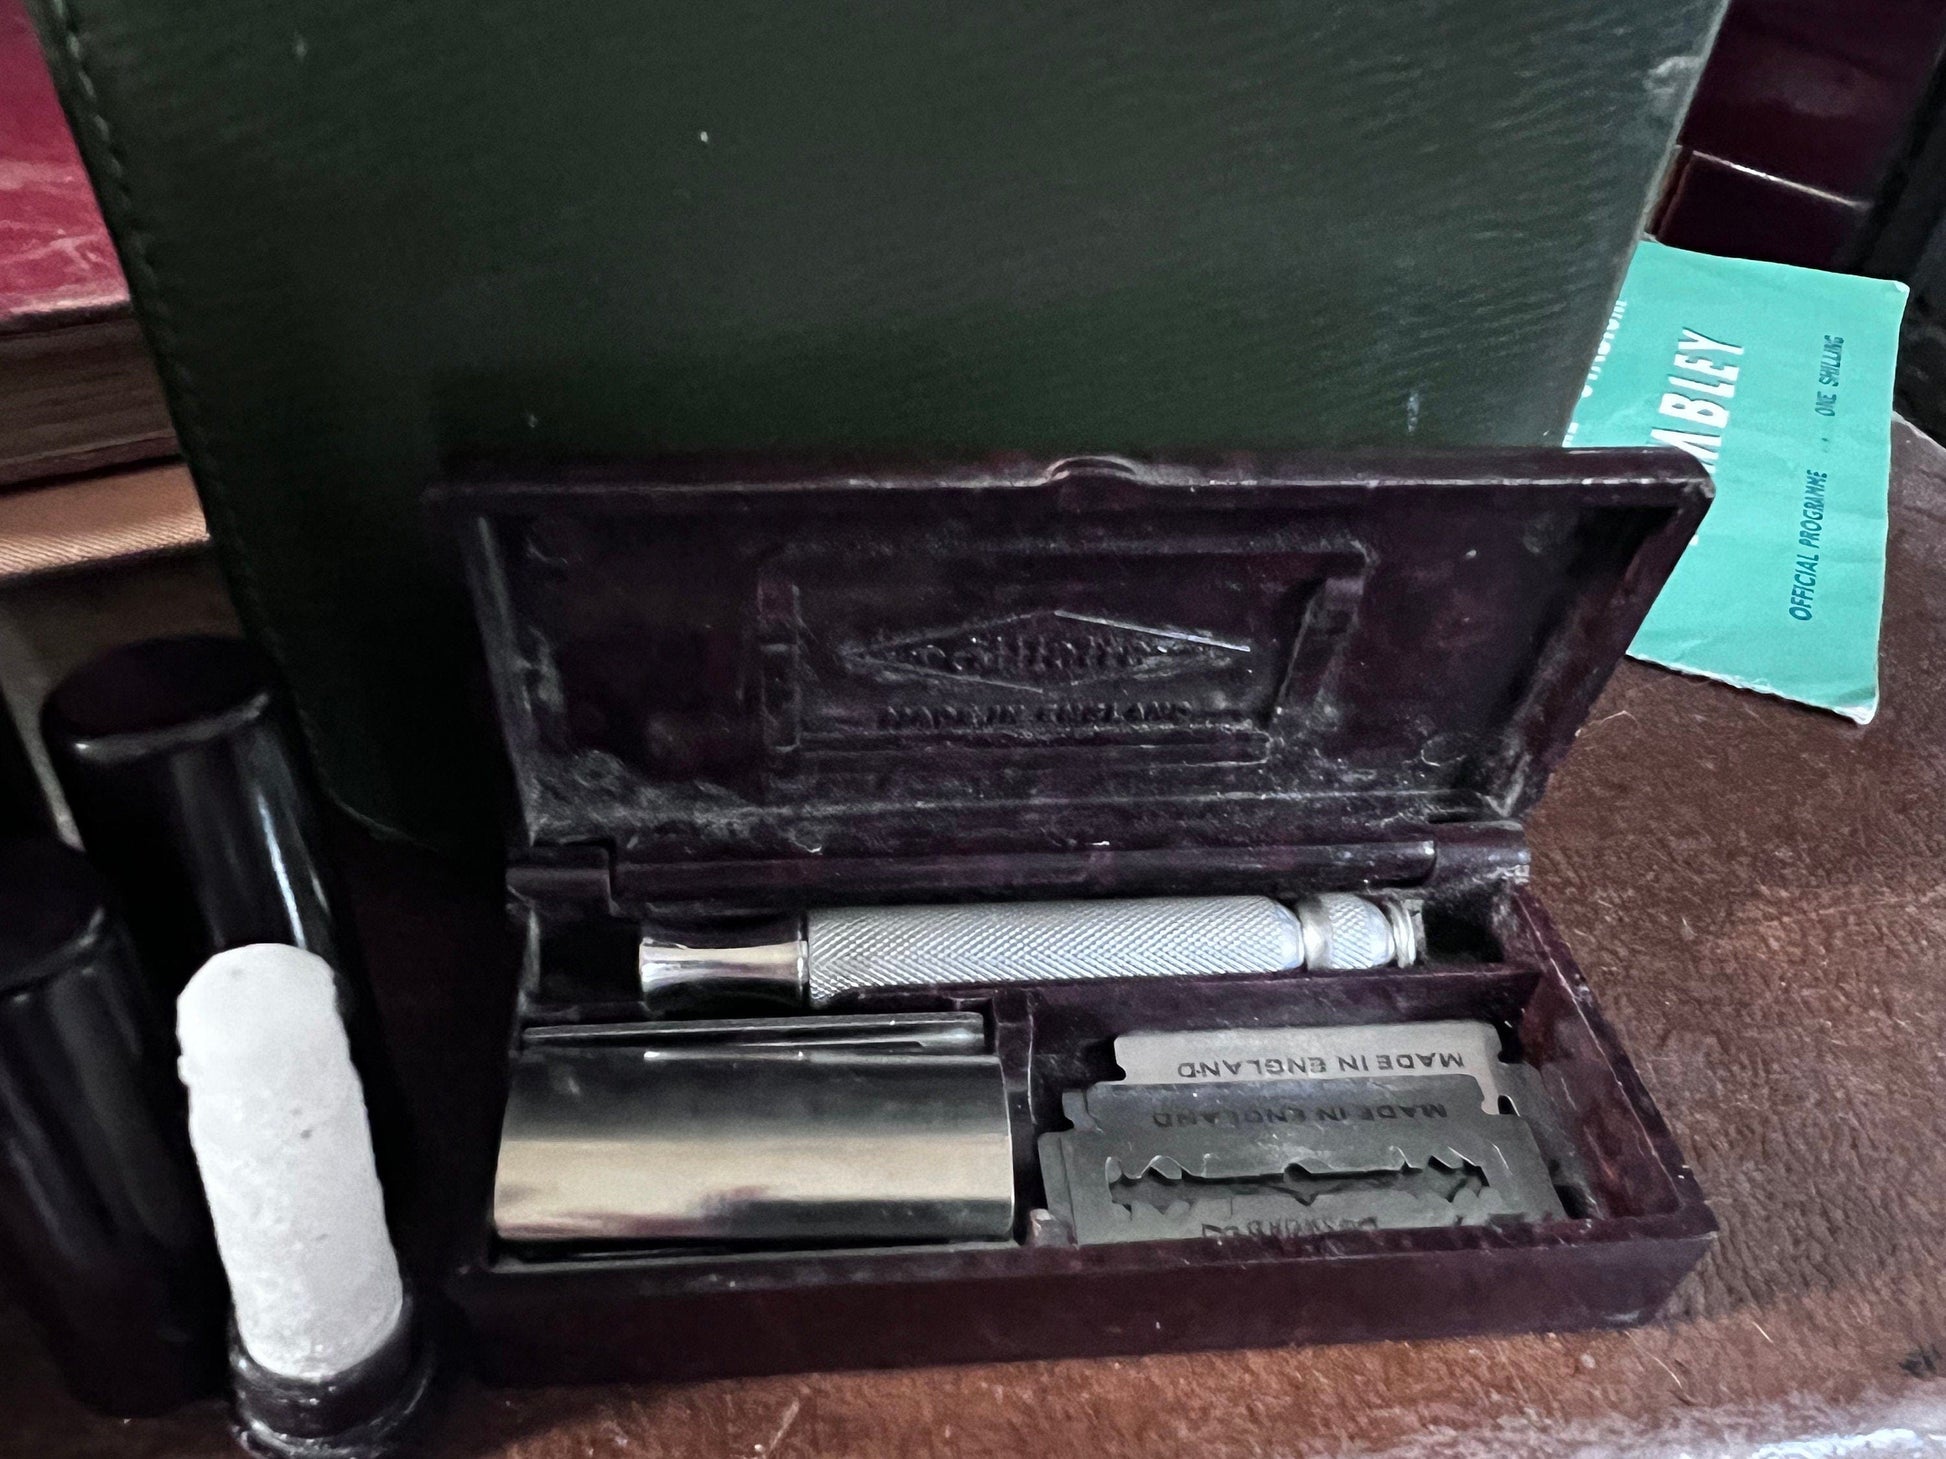 Gents Vintage 1940s Vanity Grooming Set, Leather Case, Vintage Travel, Gents Gift, Vintage Mens Grooming Set, Brush, Bottles, Containers